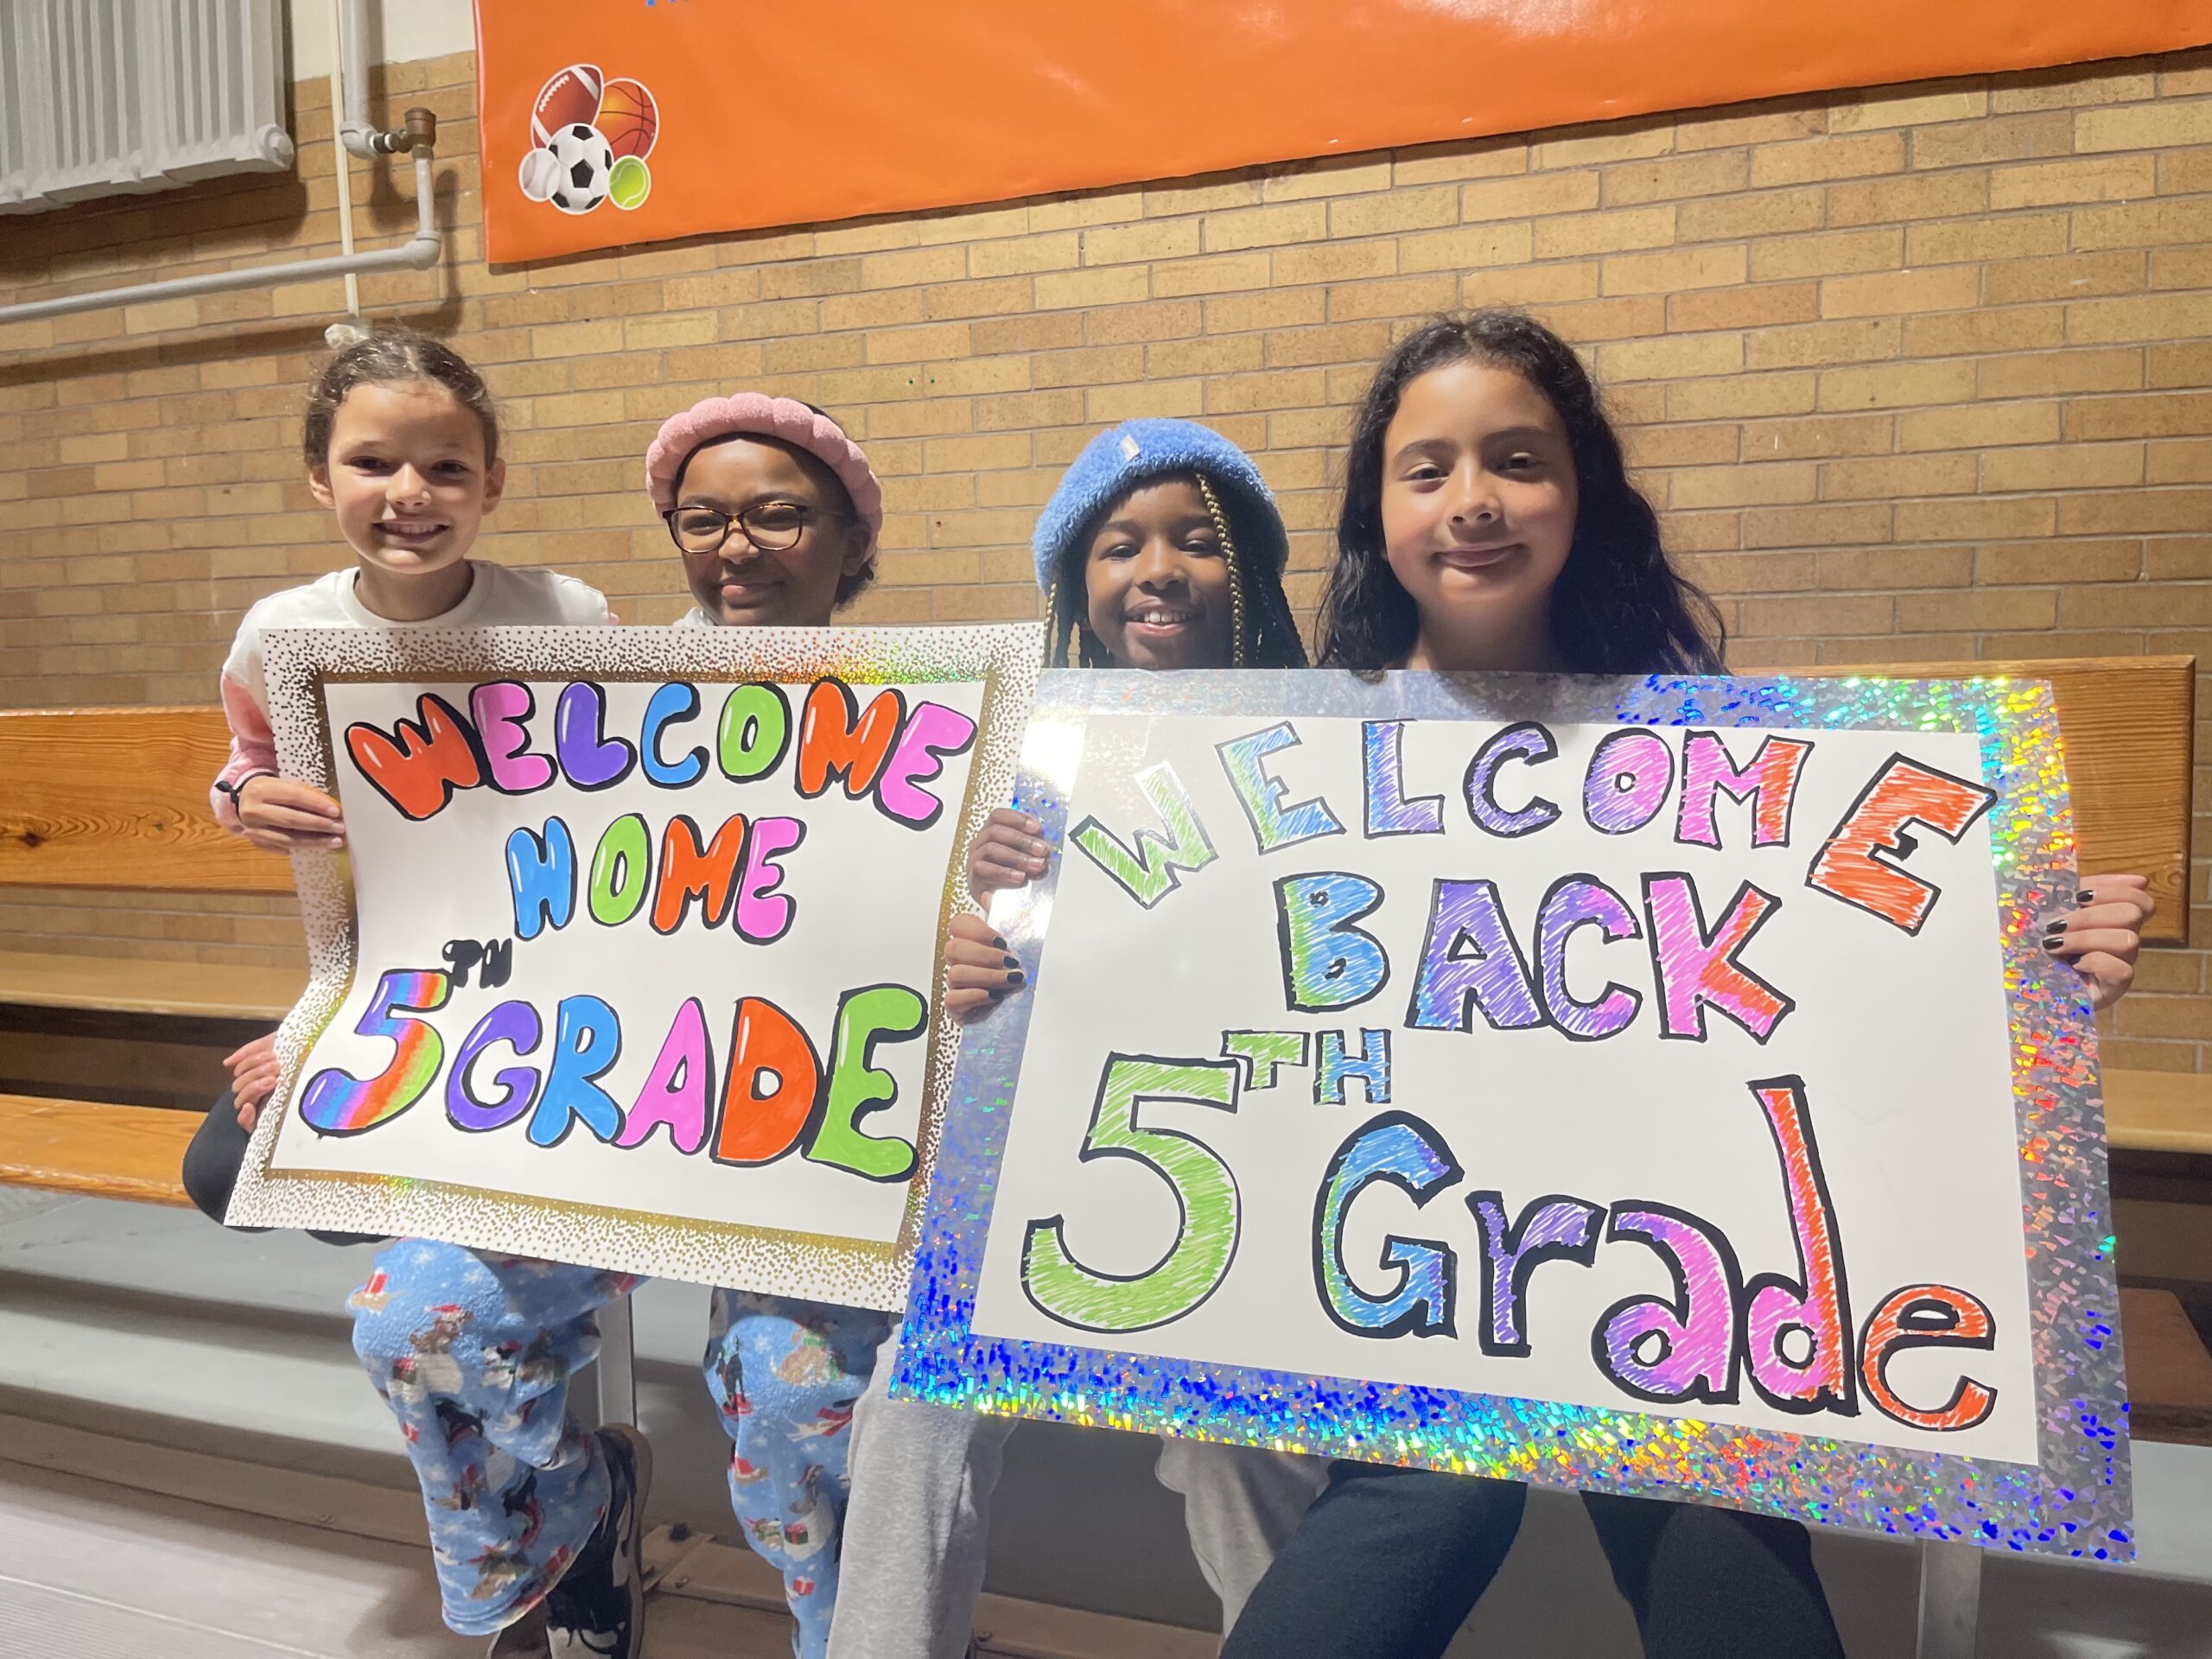 Students hold signs welcoming back 5th Graders after their trip.